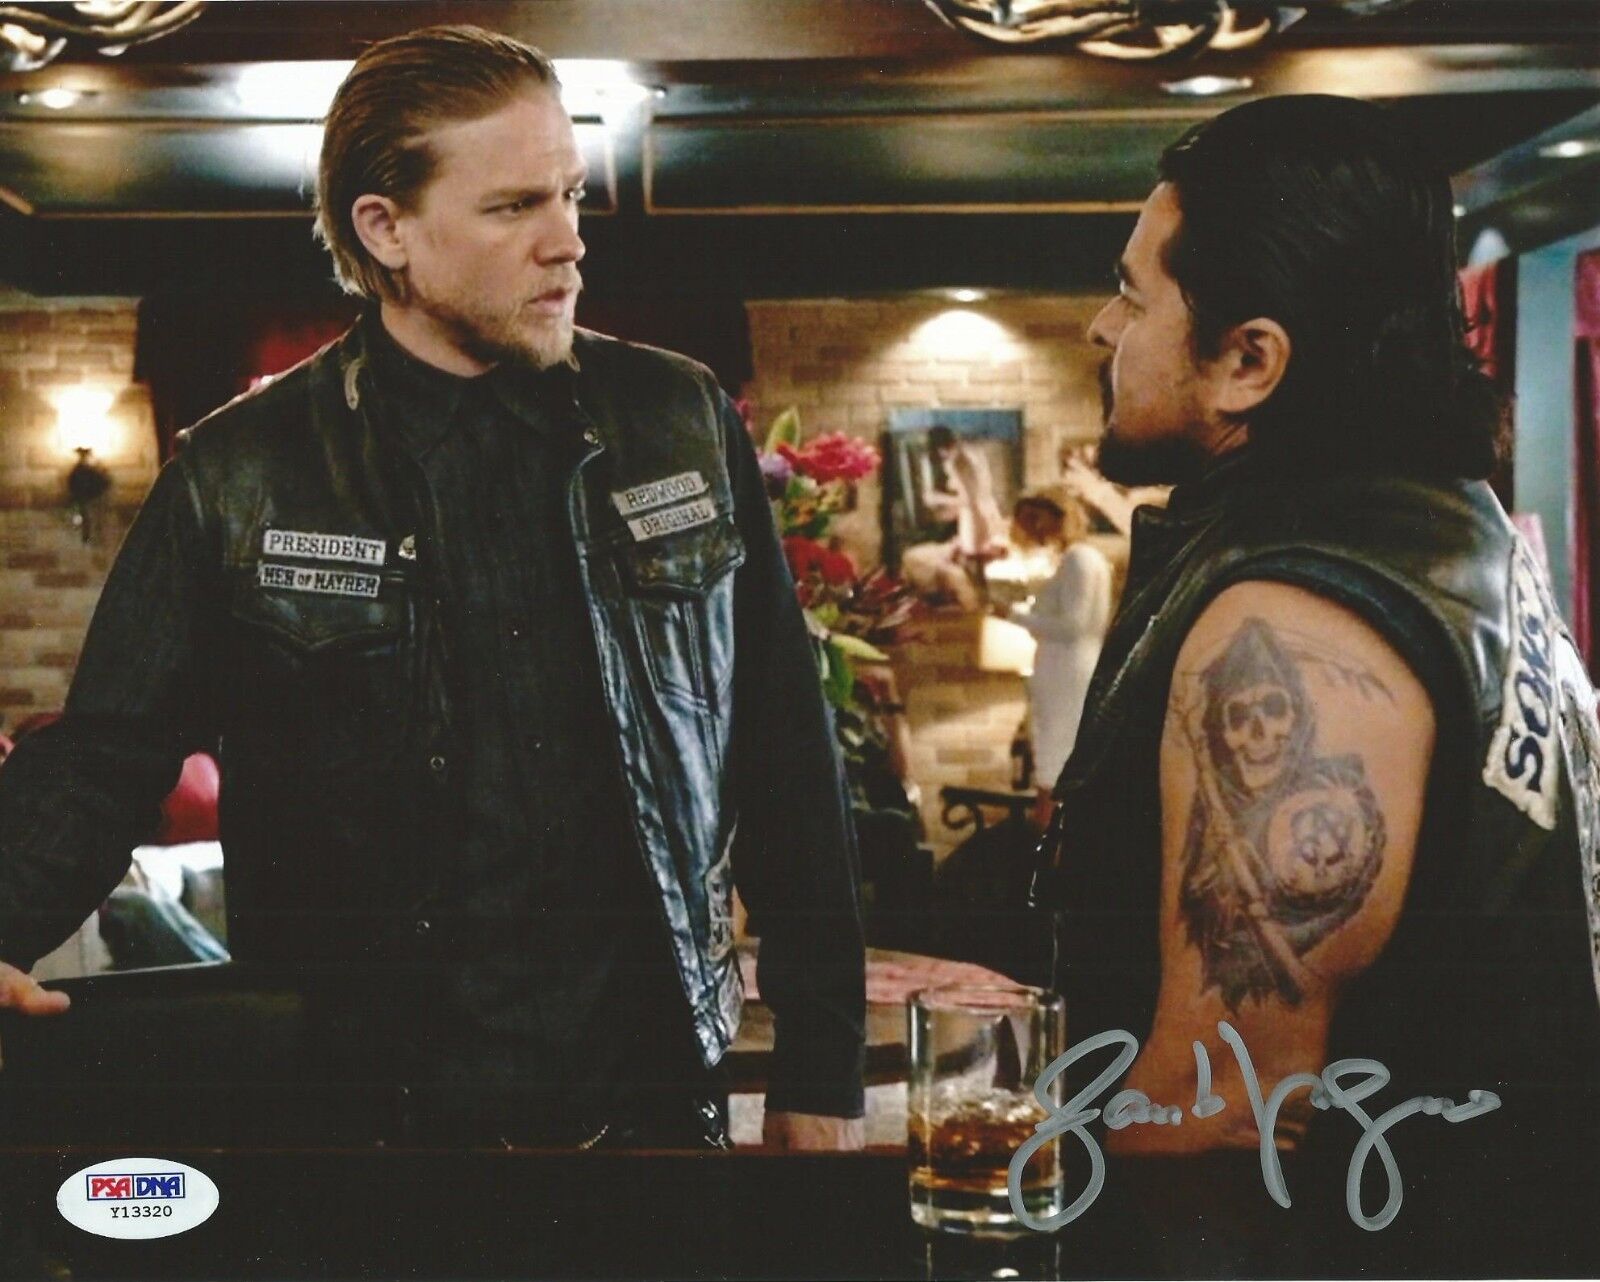 Jacob Vargas Signed 8x10 Photo Poster painting PSA/DNA Sons of Anarchy Picture w/ Charlie Hunnam